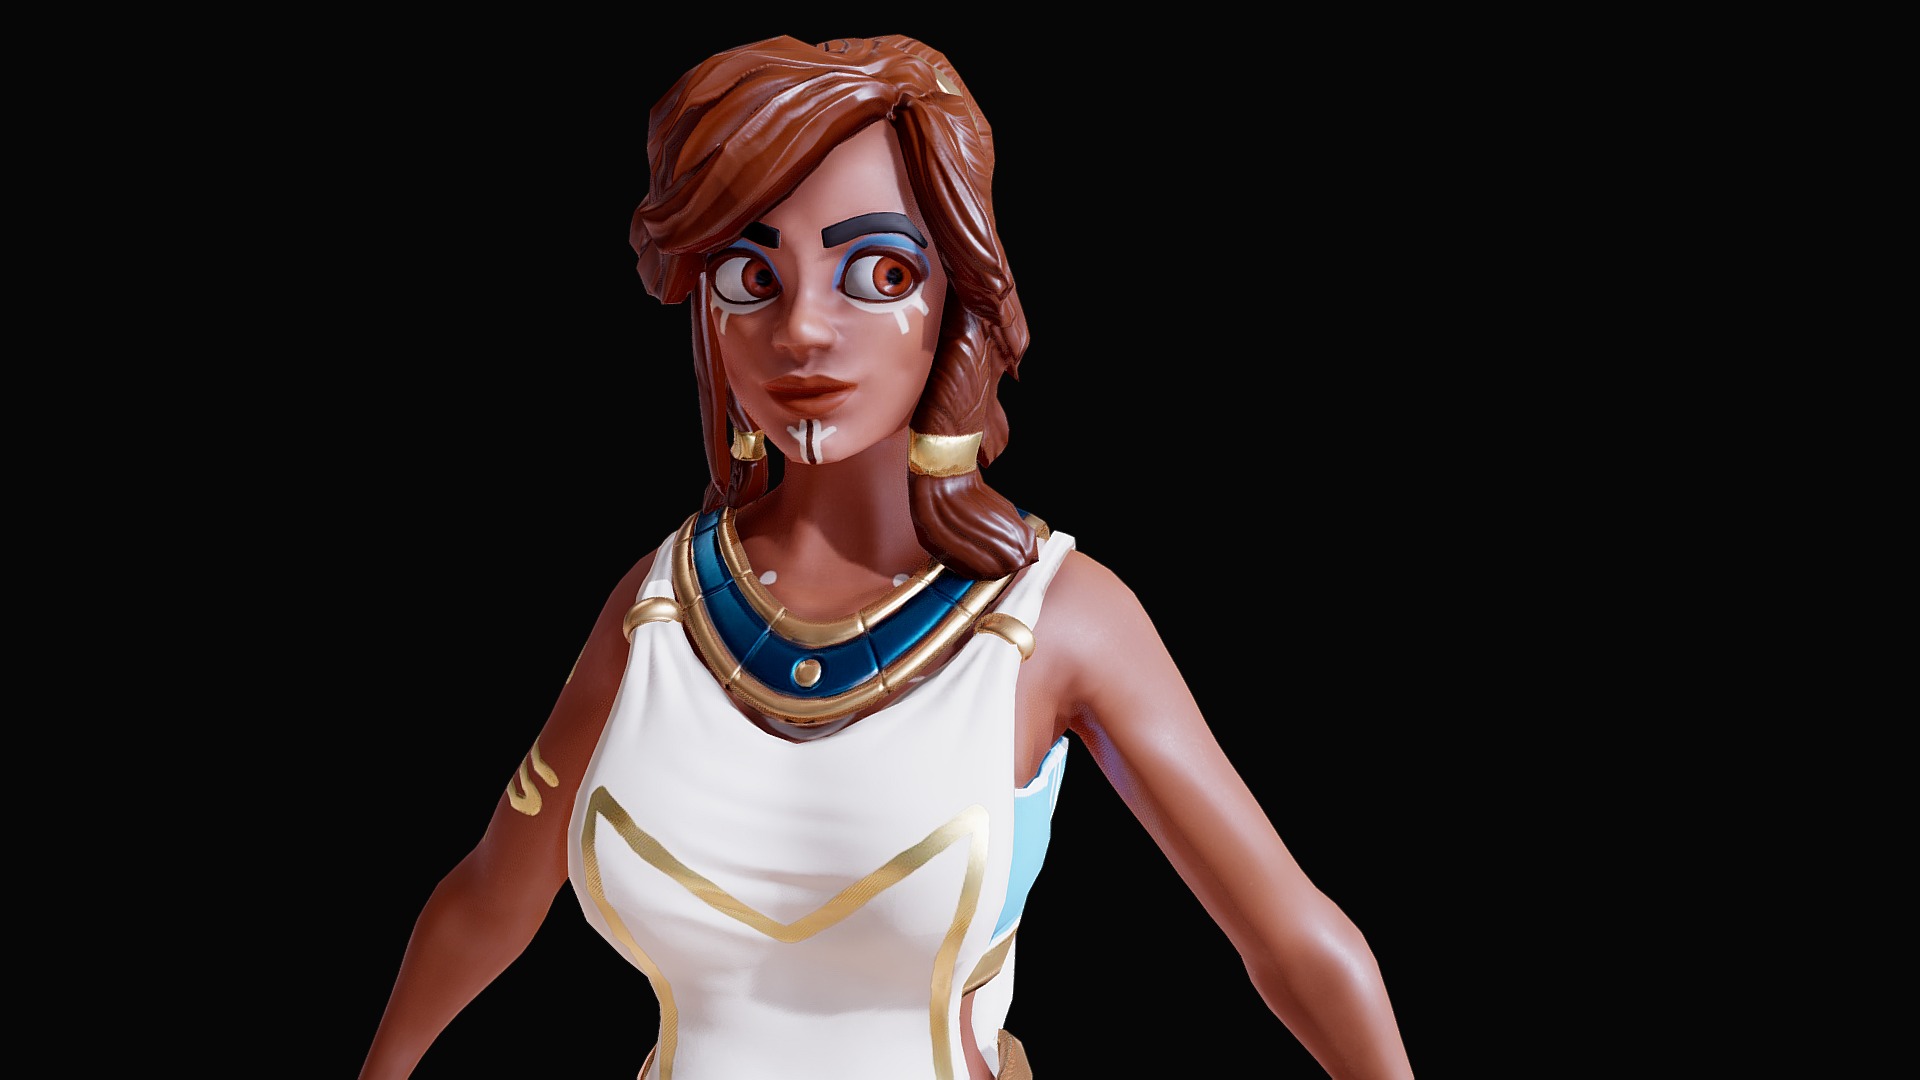 3D model Princess - This is a 3D model of the Princess. The 3D model is about a woman wearing a garment.